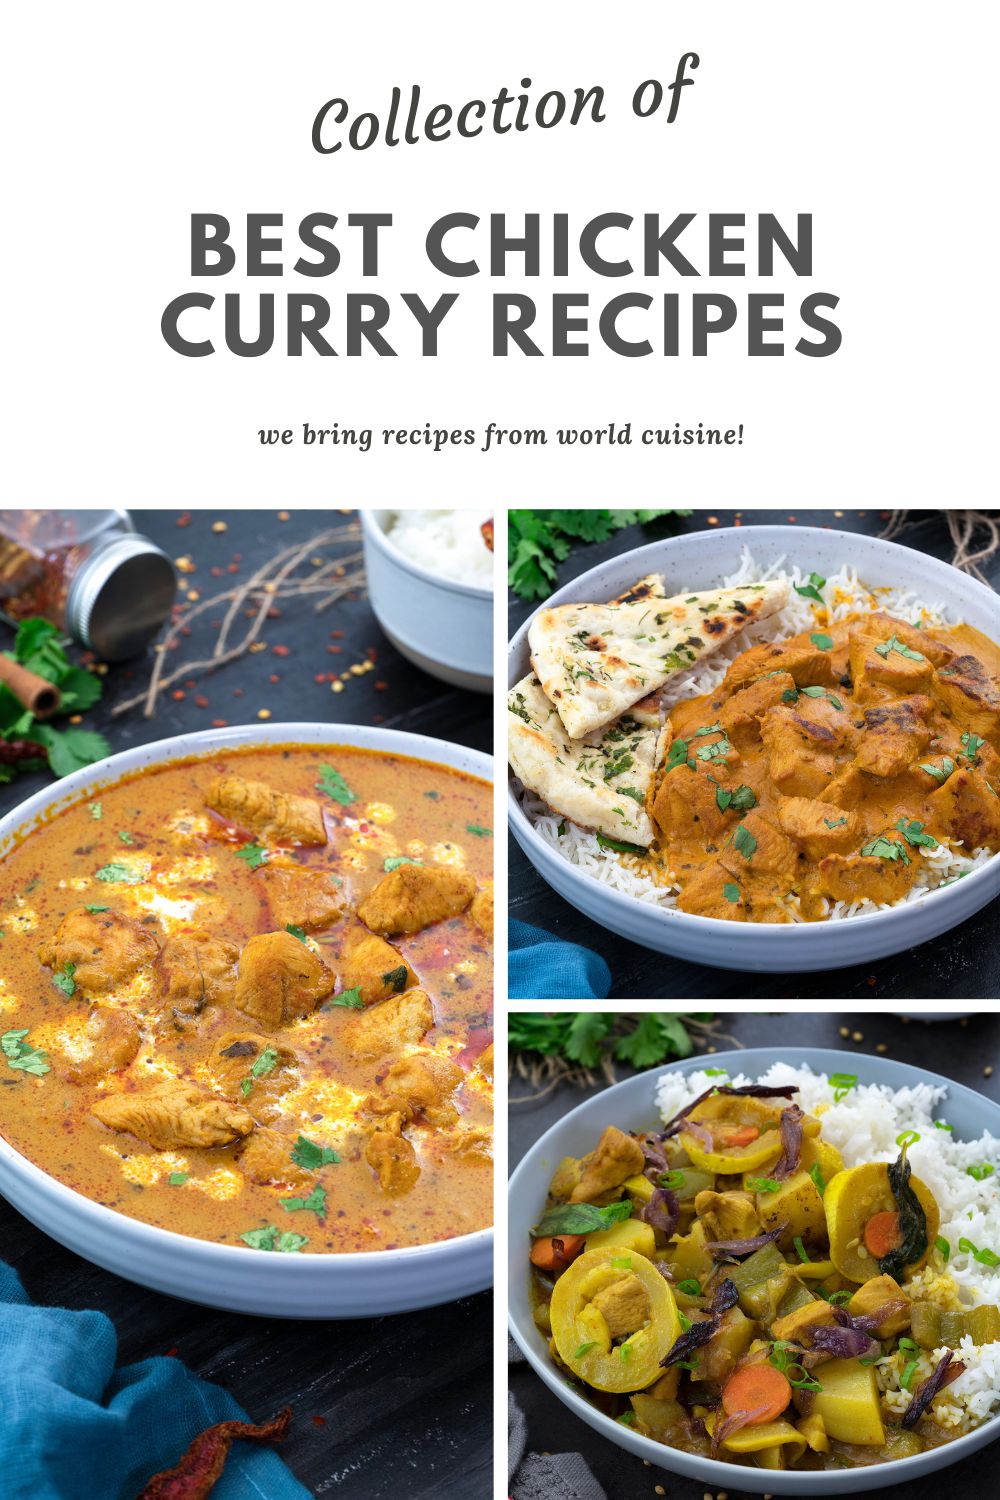 An image collage featuring different chicken curry recipes, each presented in a separate bowl.